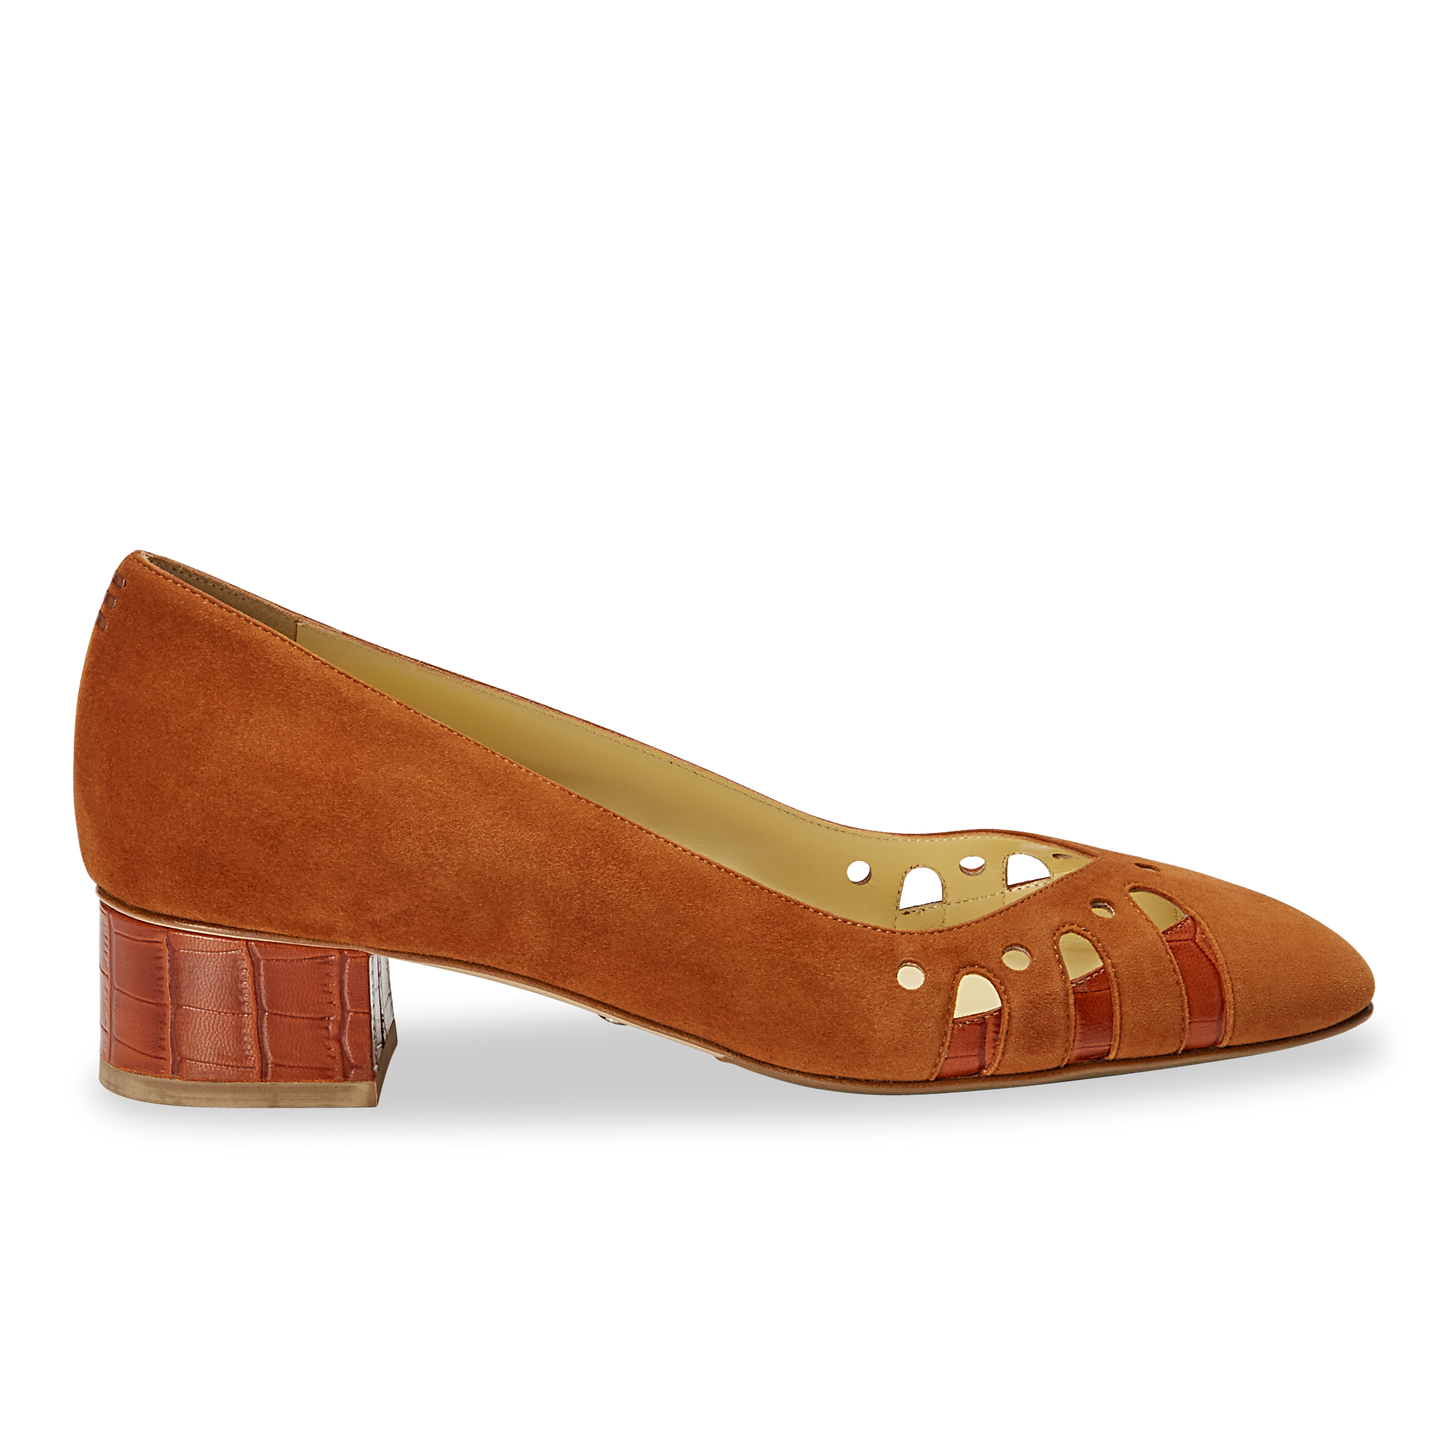 30mm Italian Made Shellie Round Toe Pump in Cognac Suede